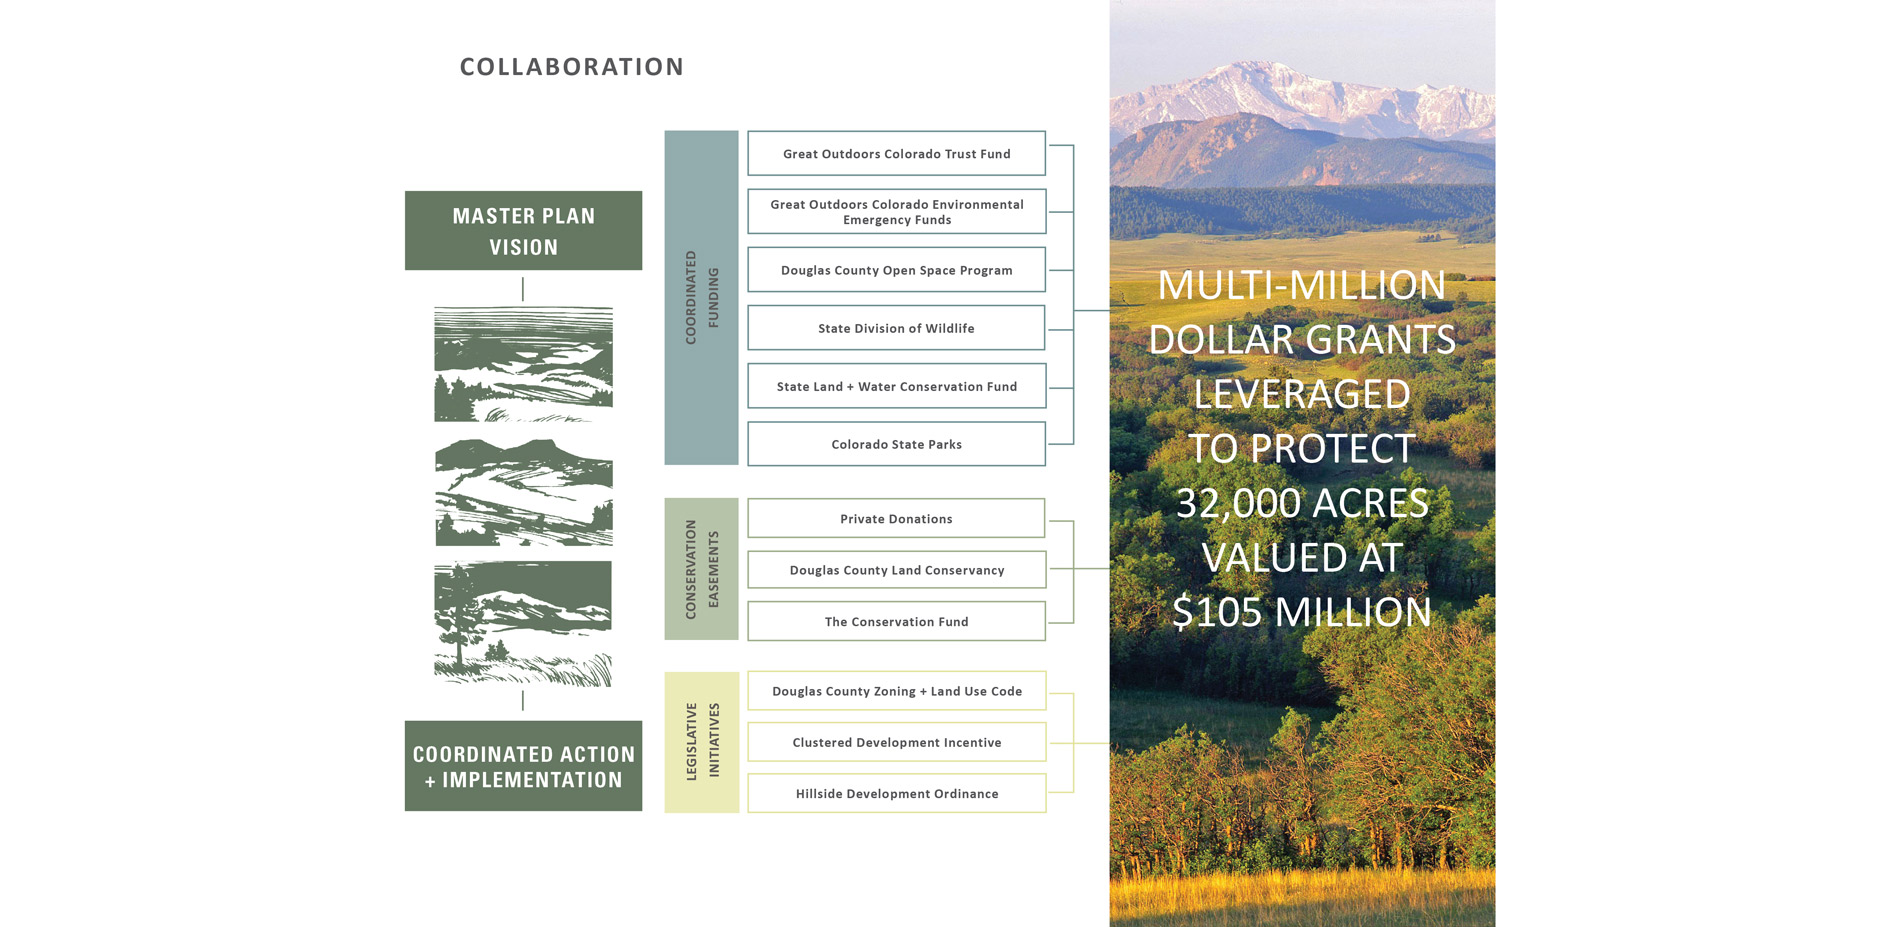 Collaboration between conservation organizations, private landowners, state, county and local governments, working together to leverage funding, was e…